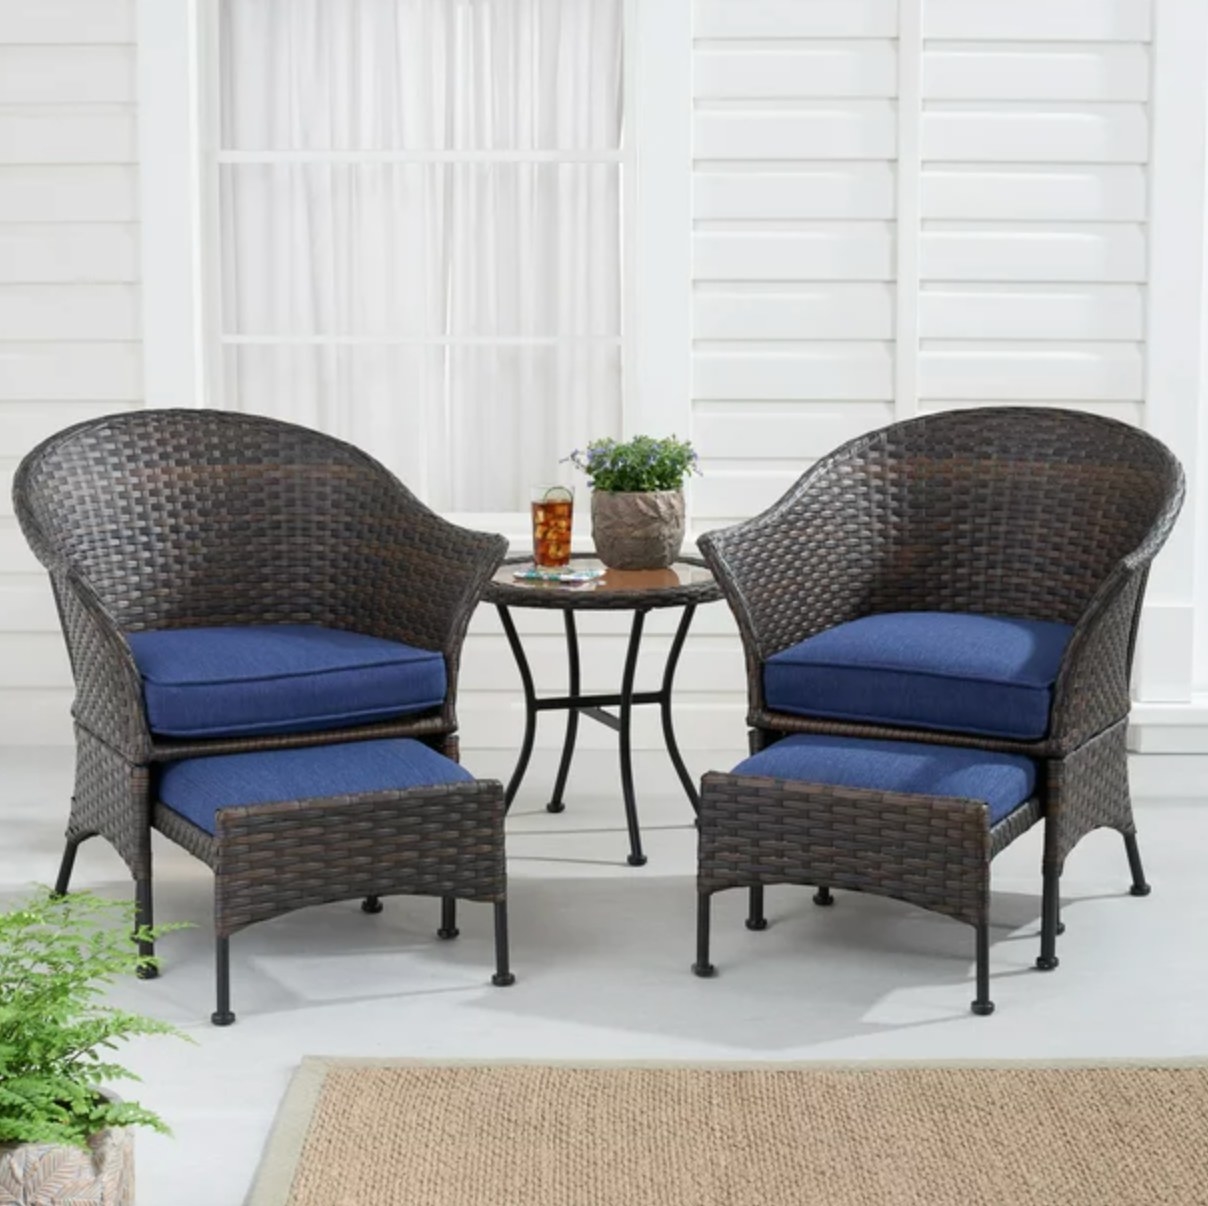 the dark wicker chairs, table, and ottomans with dark blue cushions in a decorated outdoor space